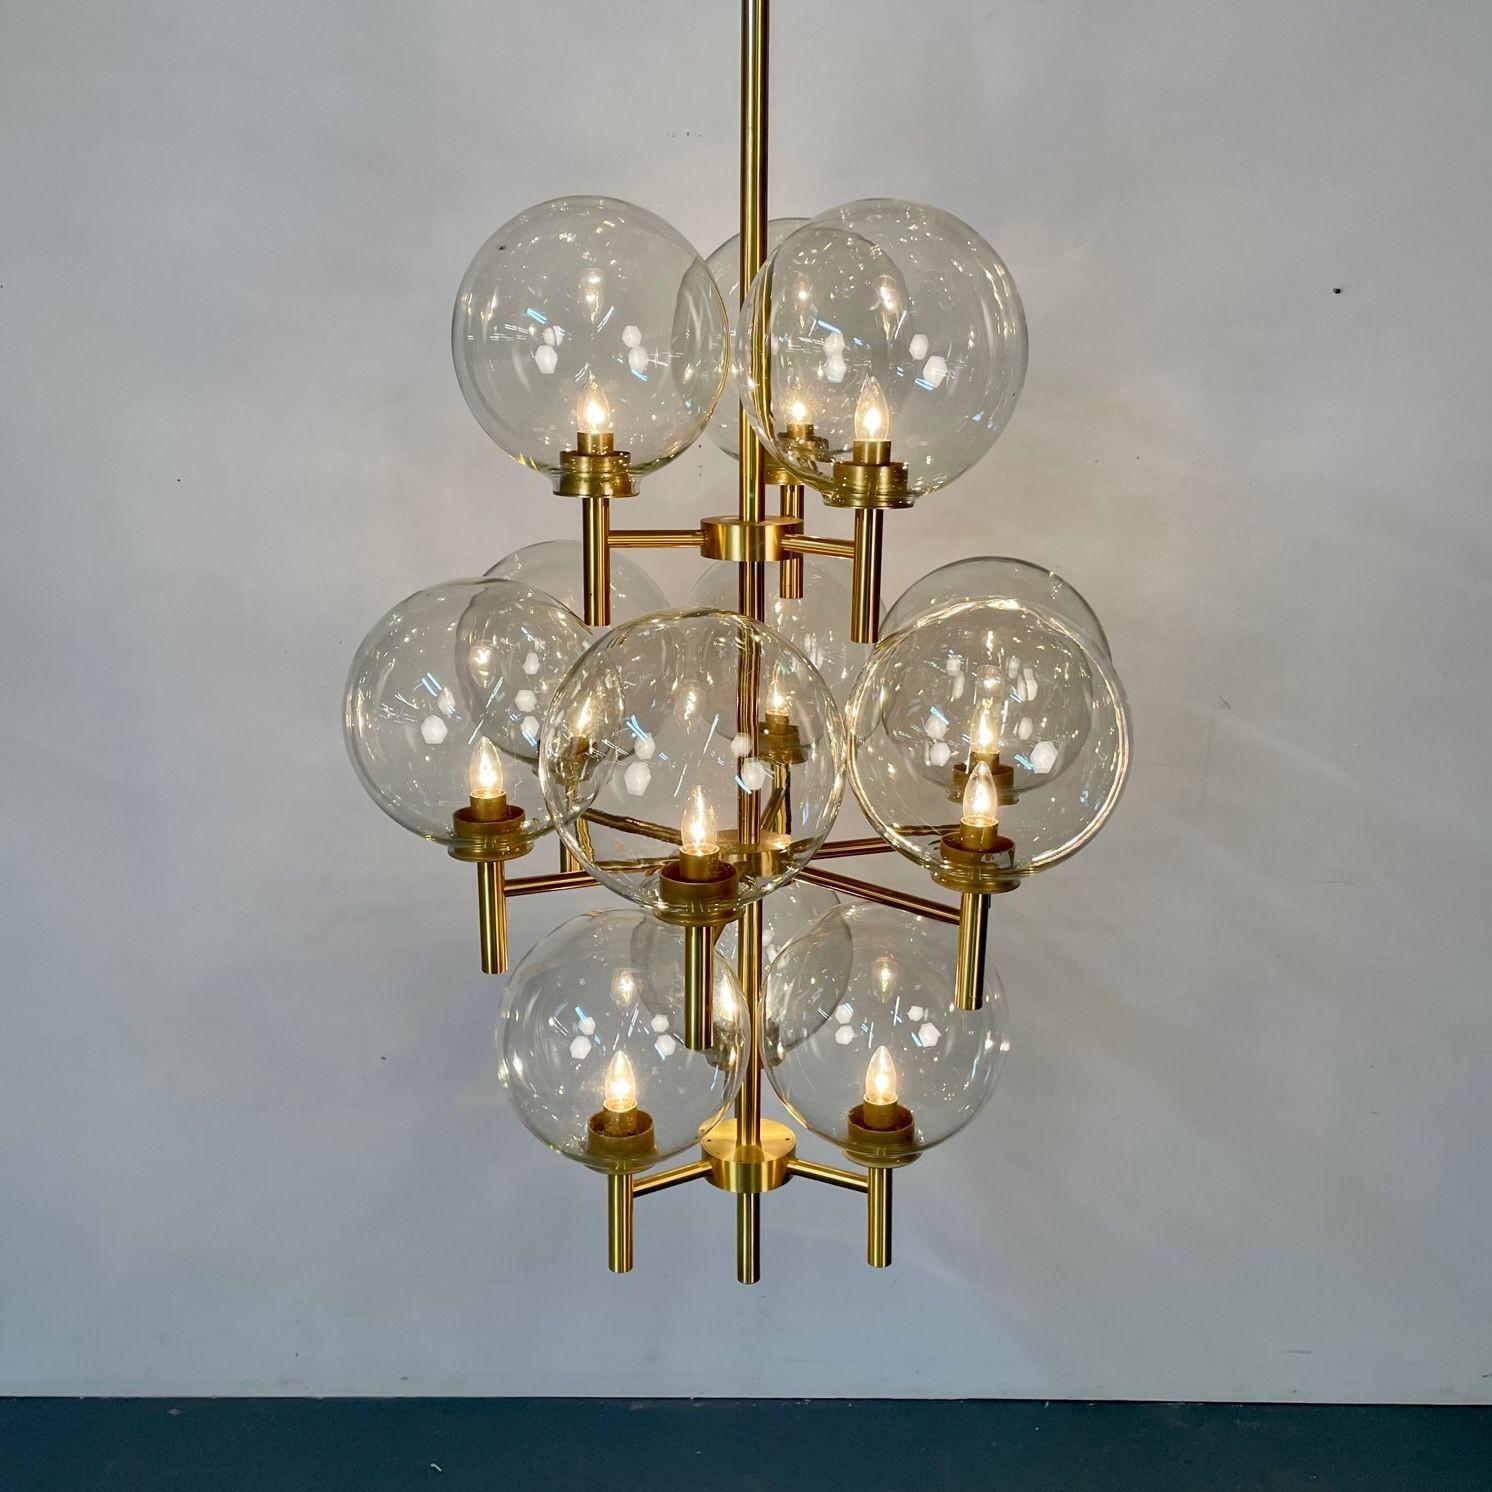 Pair of Monumental Mid-Century Modern Style Chandeliers in Amber Glass and Brass For Sale 2